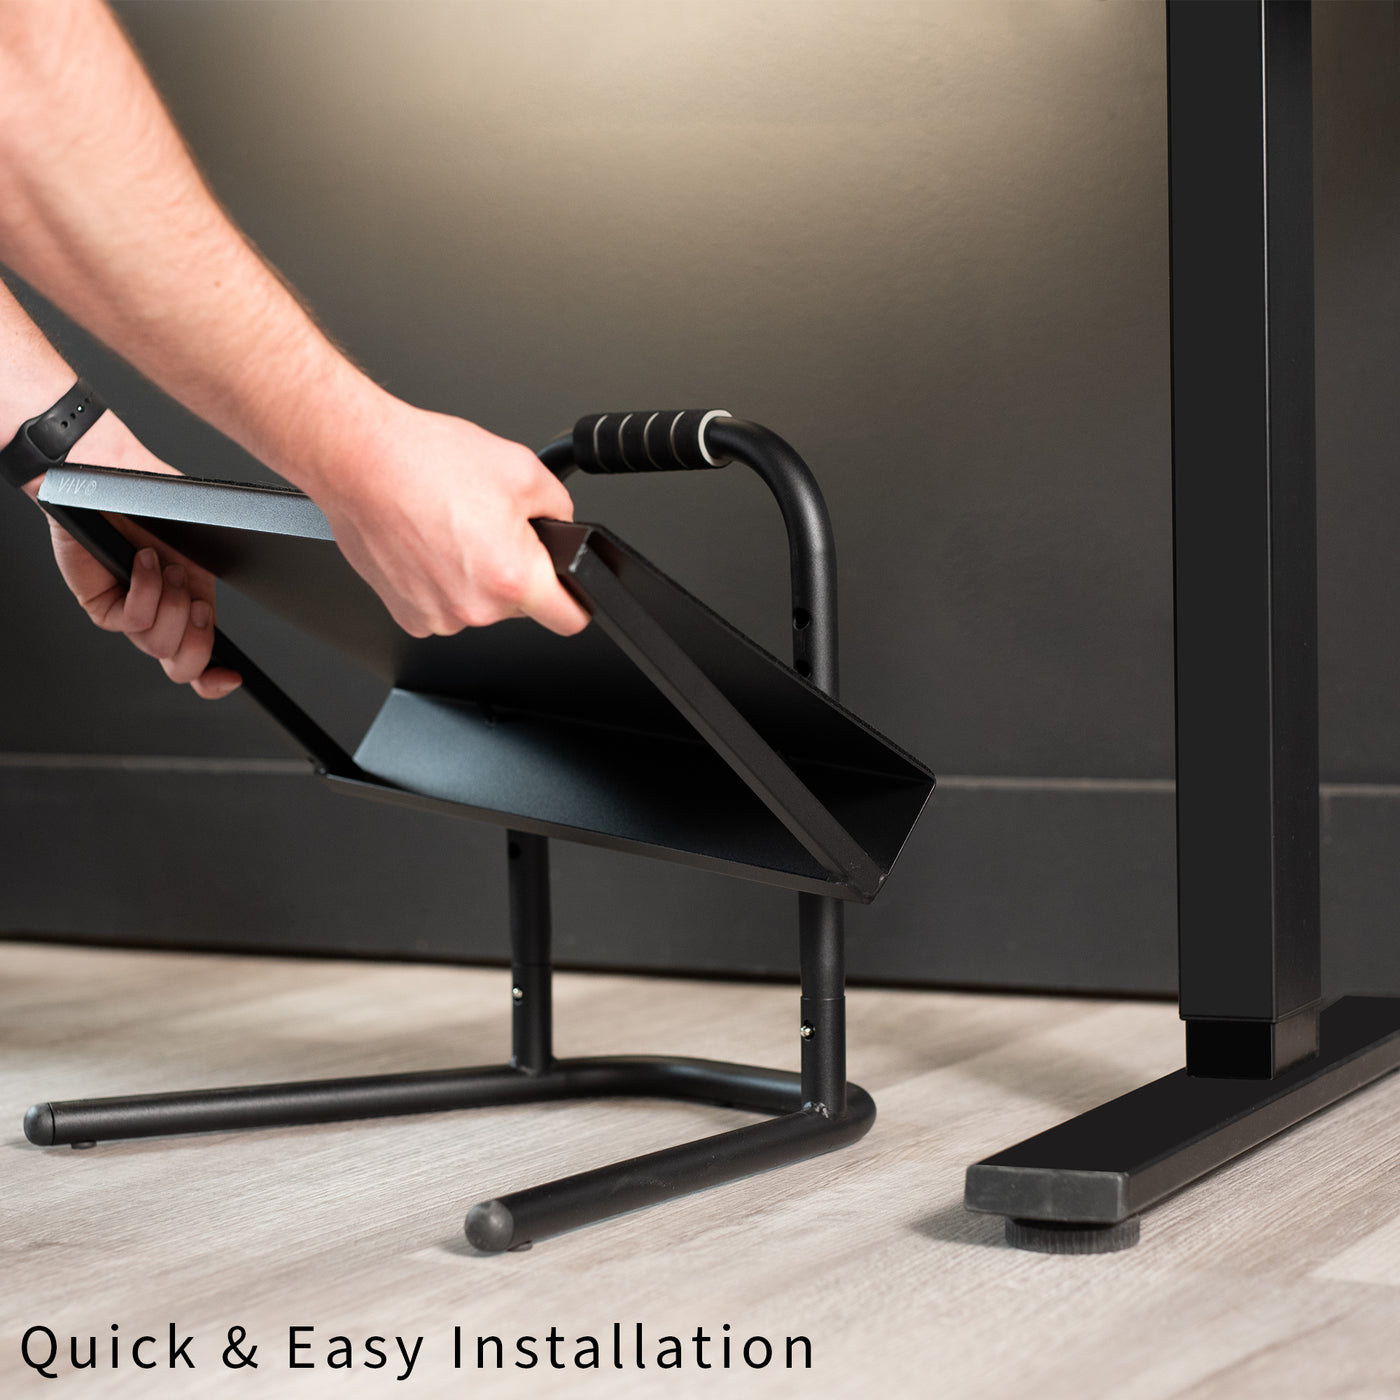 Installation is made easy so you can have your footrest assembled in no time.